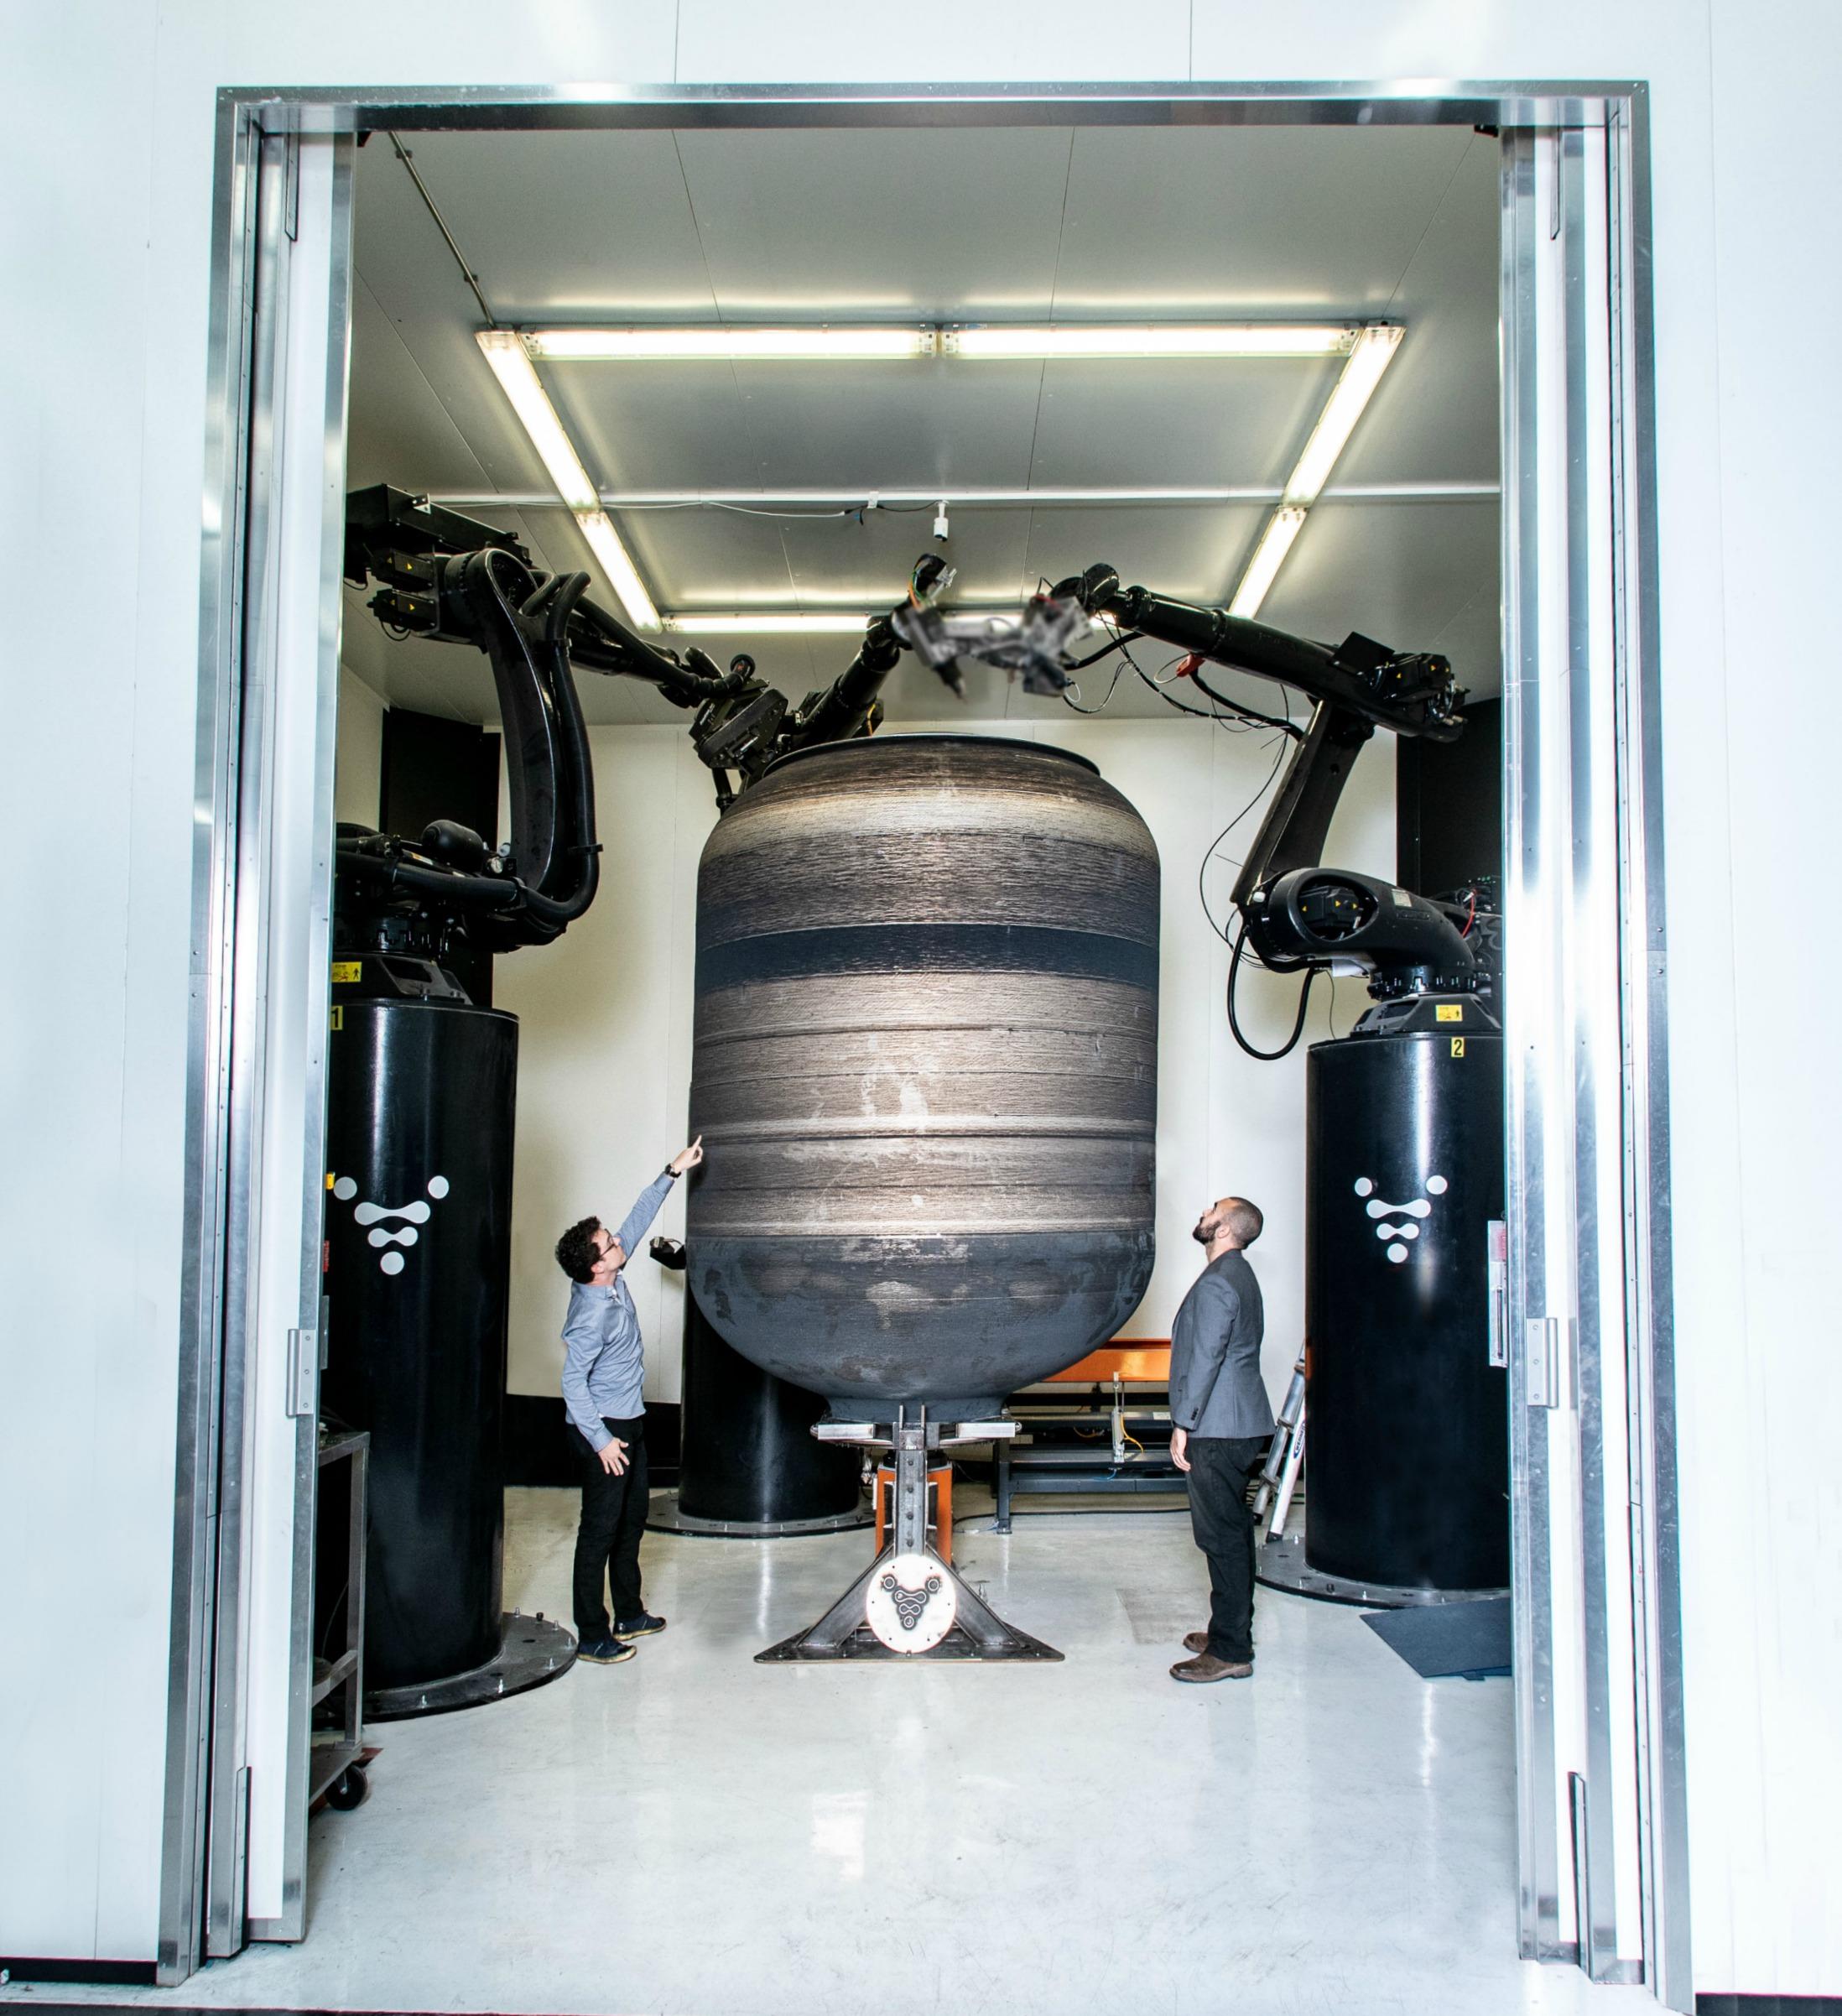 Relativity Space Prints 11-Foot-Tall Fuel Tank with Stargate 3D Printer - 3DPrint.com | The Voice of 3D Printing / Additive Manufacturing